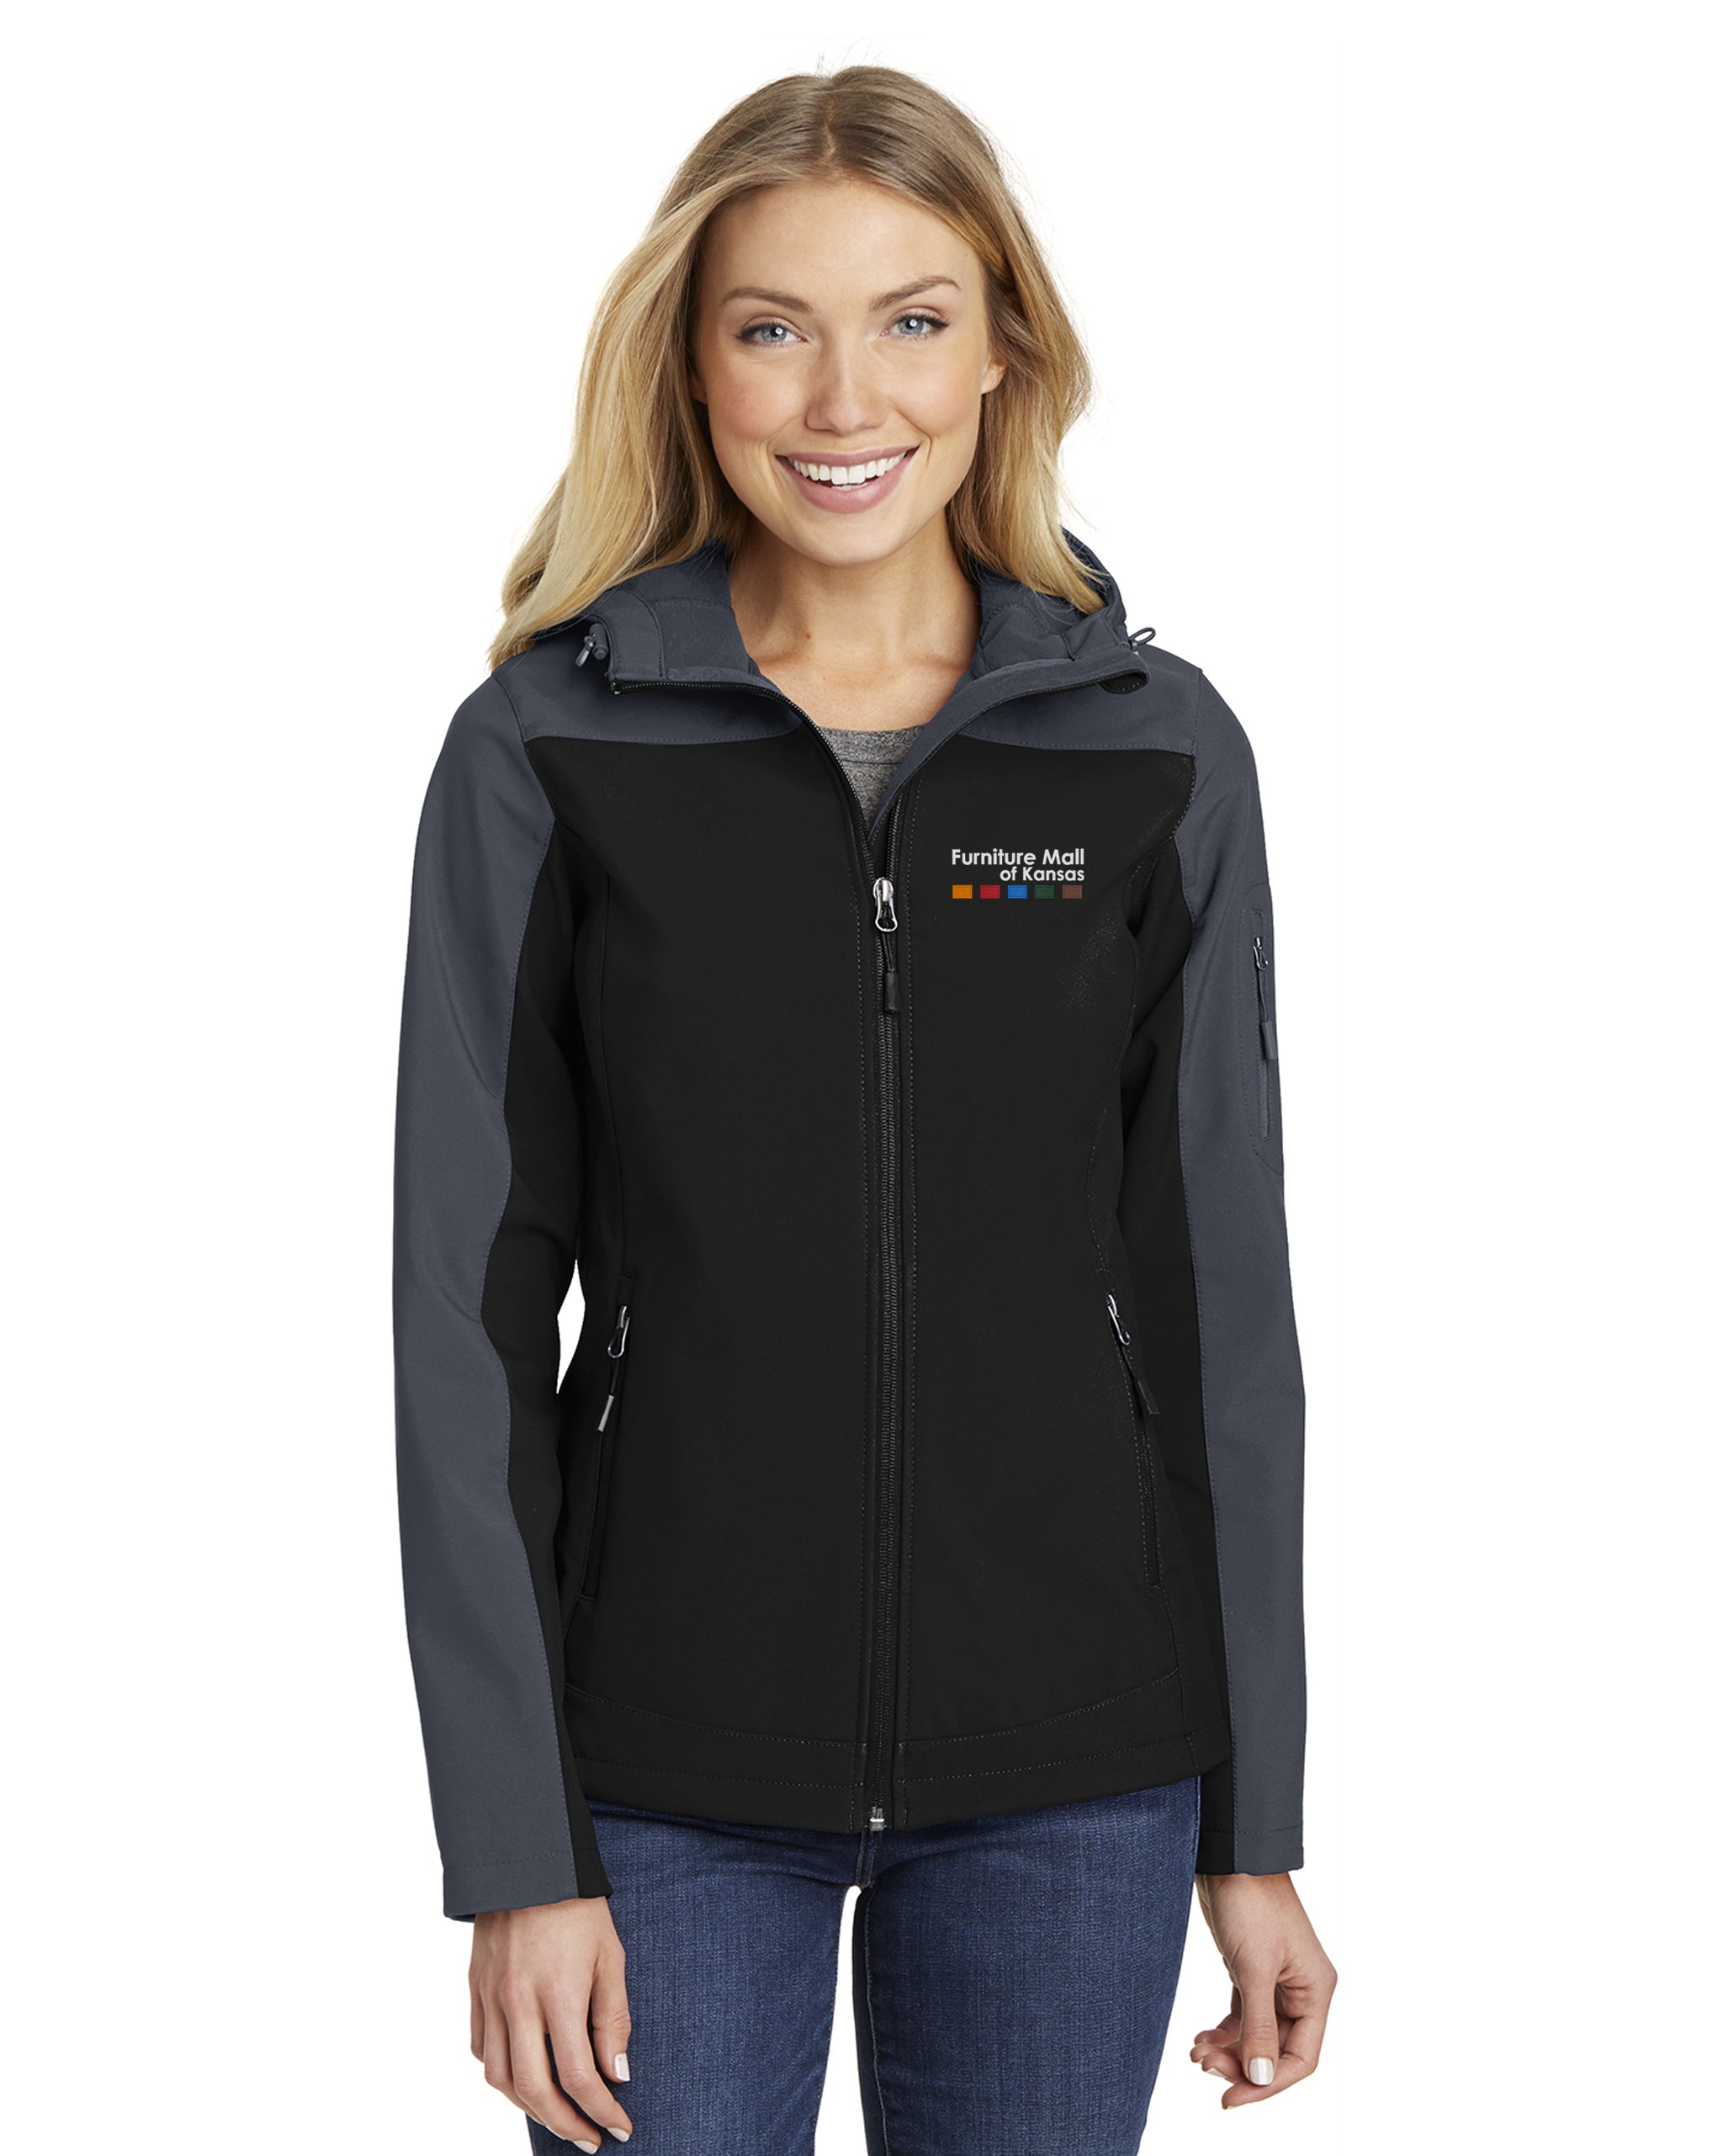 Furniture Mall of Kansas - Port Authority Ladies Hooded Core Soft Shell Jacket - L335